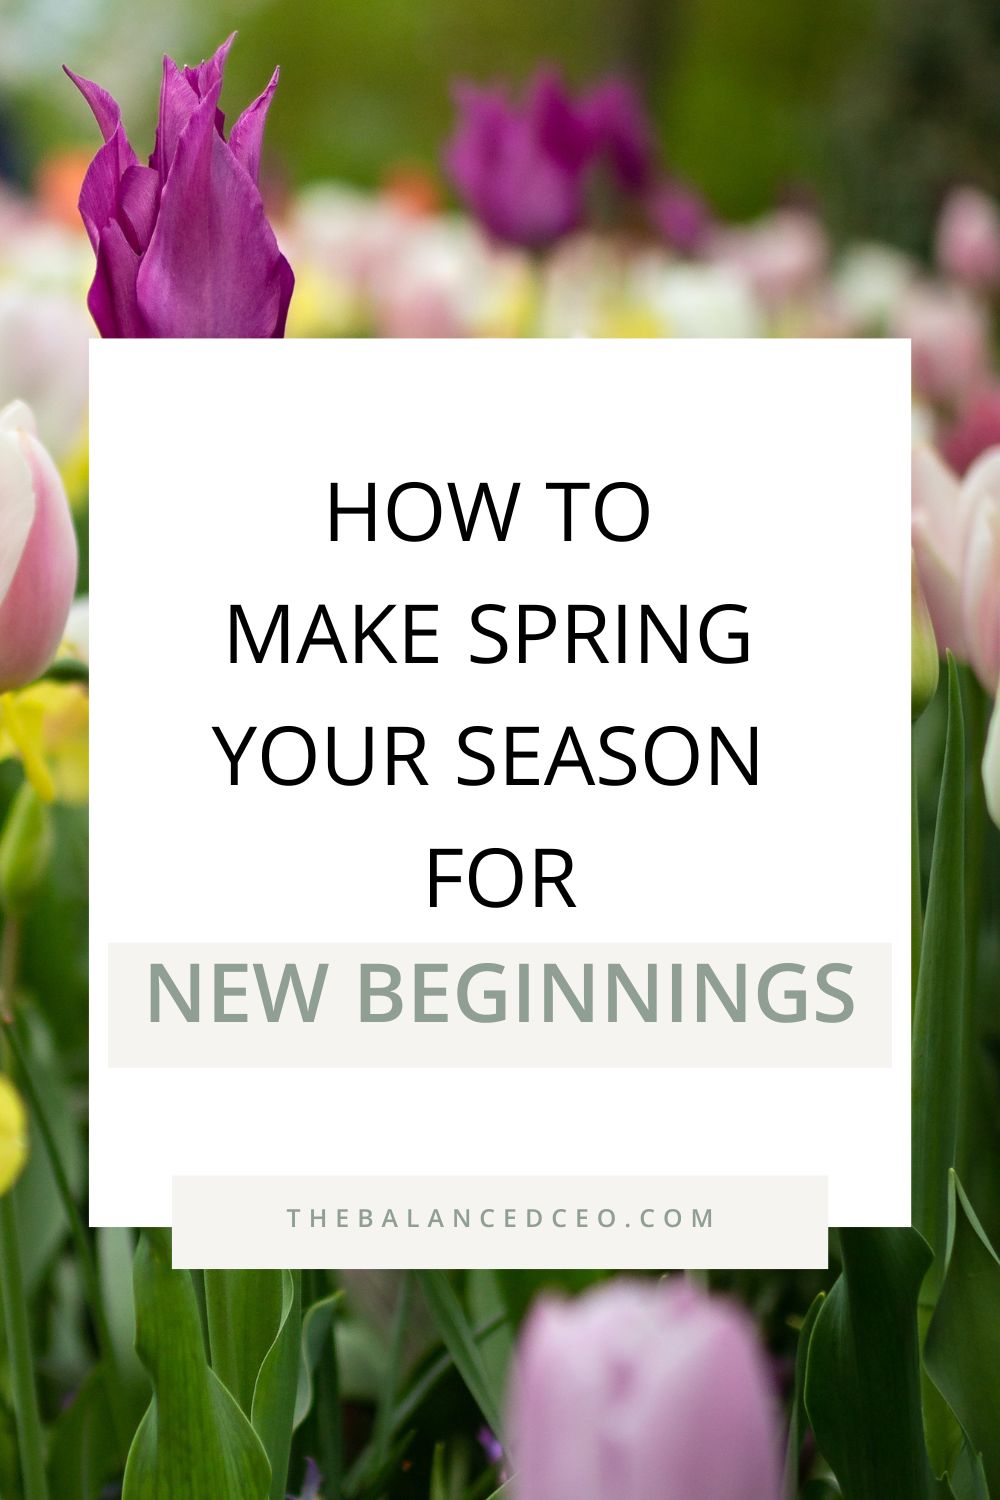 How to Make Spring Your Season for New Beginnings